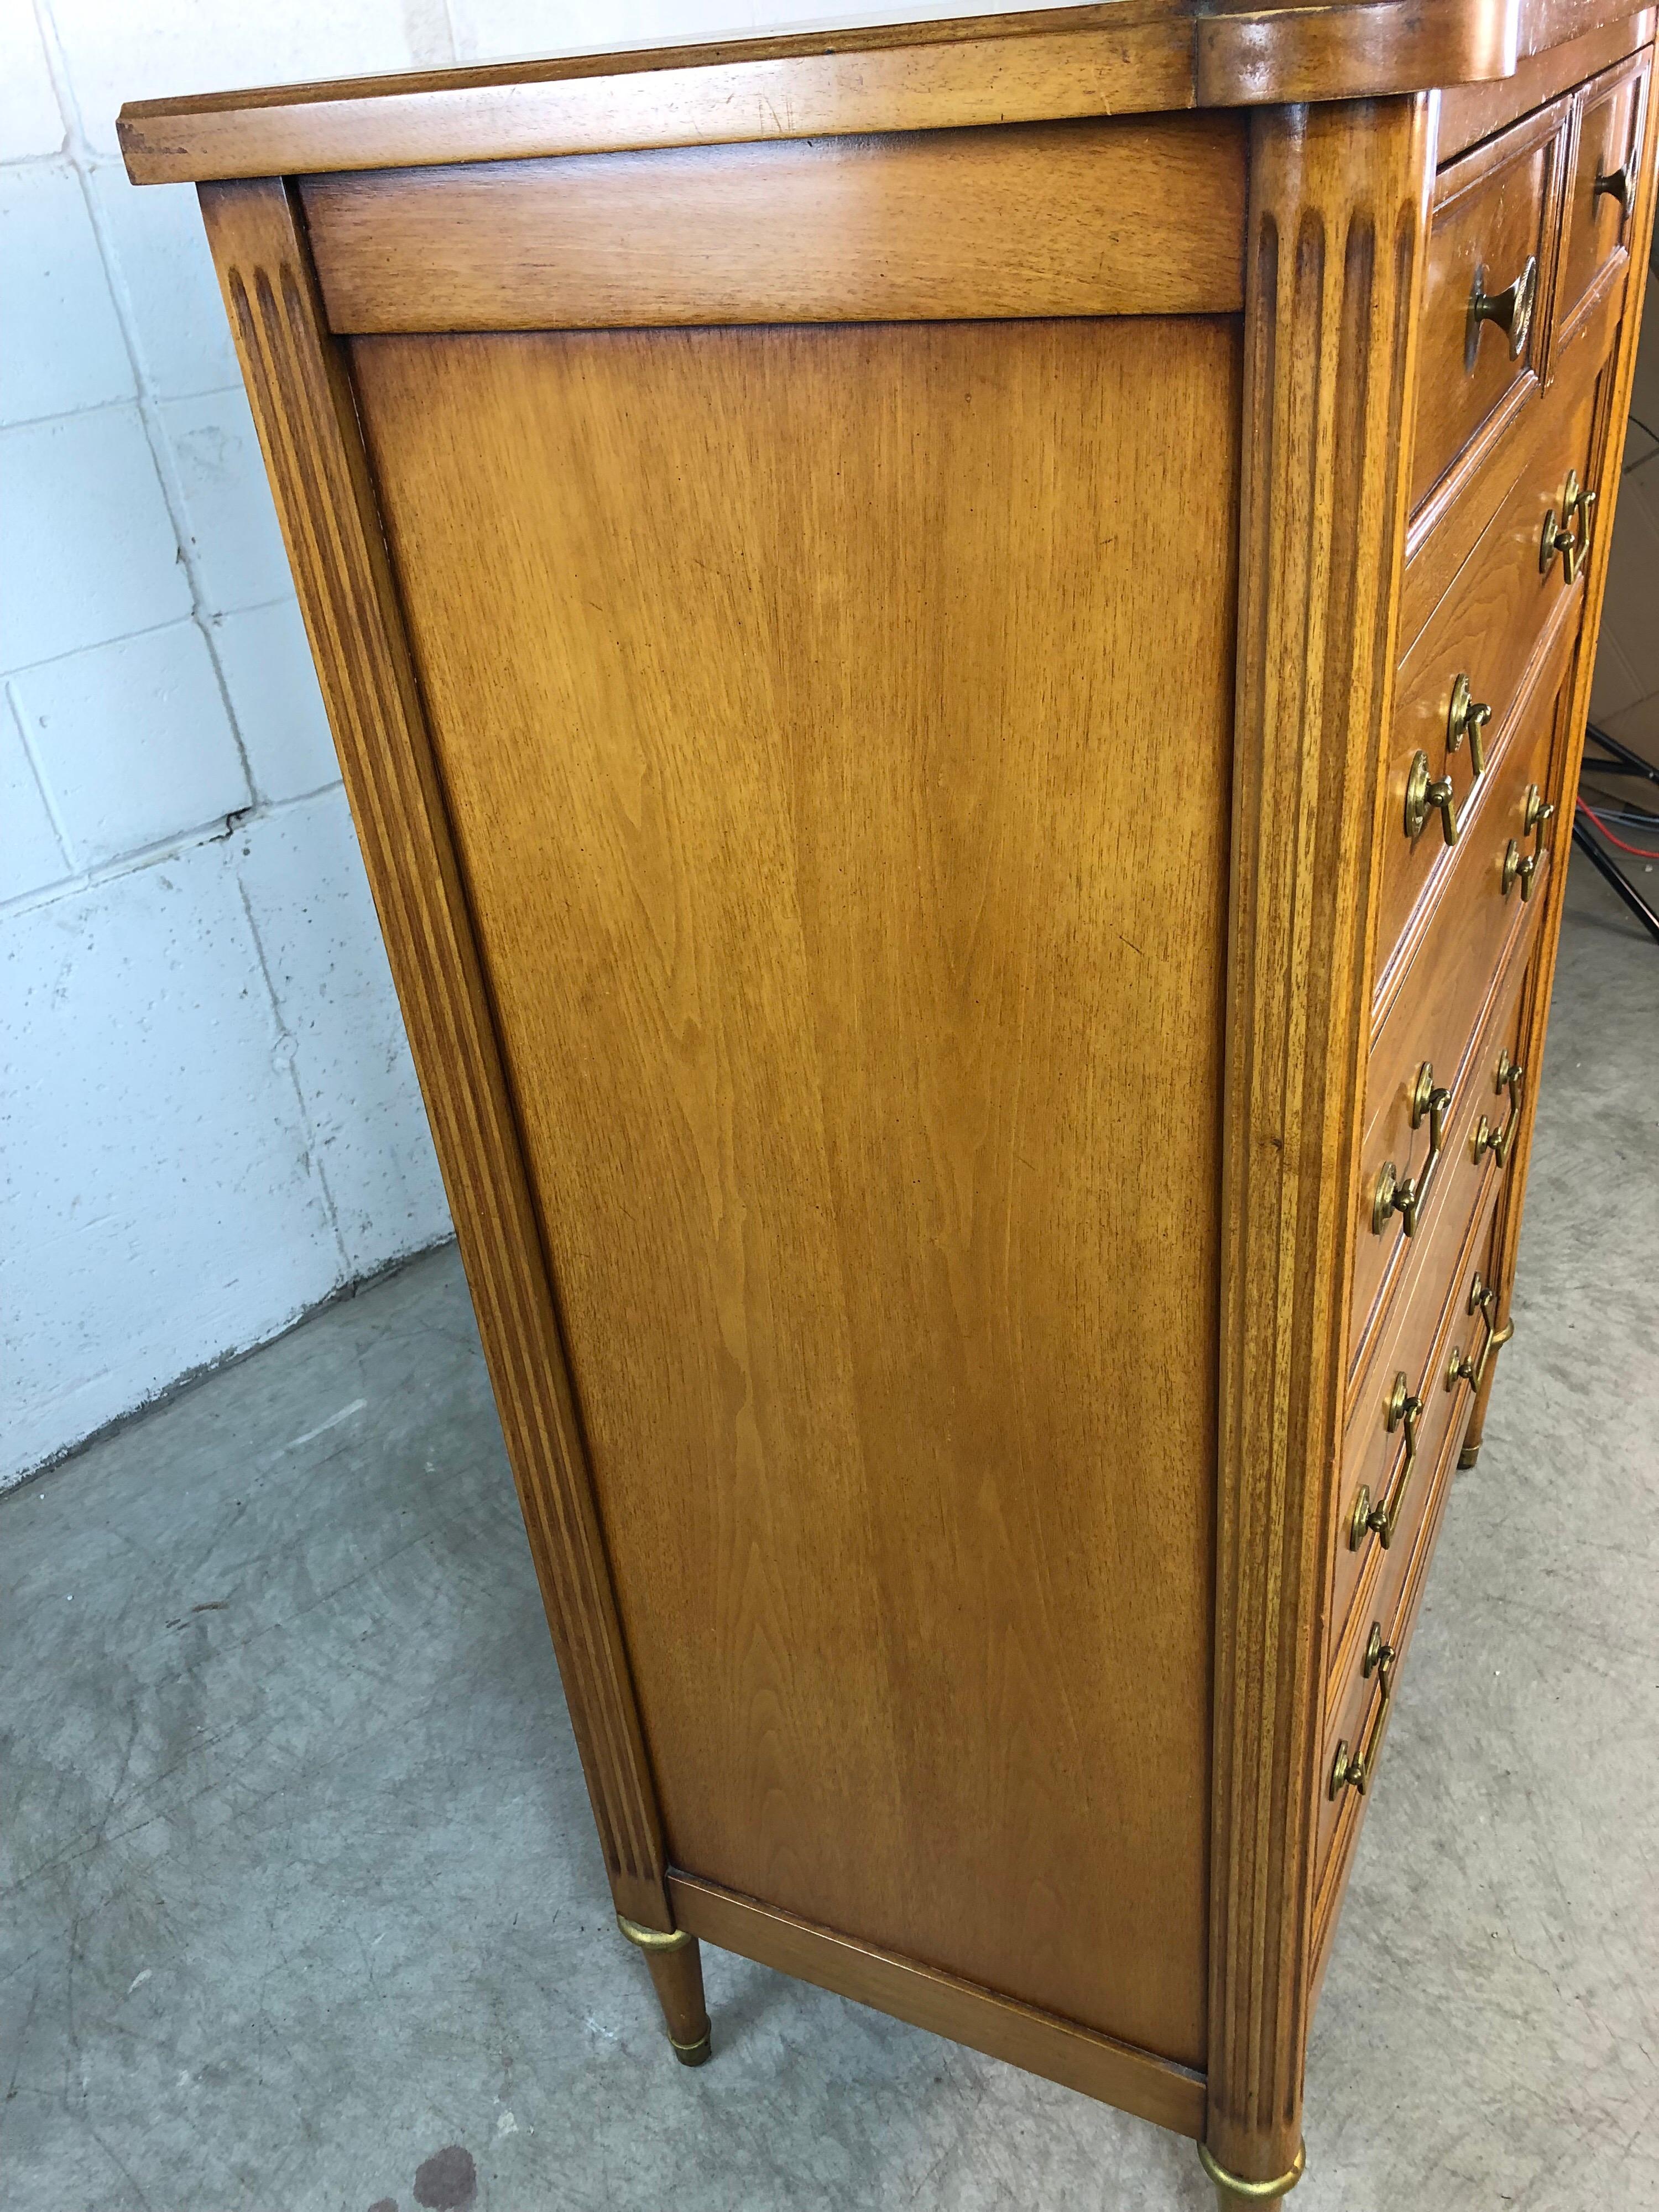 1960s Bodart Furniture Sheridan Tall Mahogany Dresser In Good Condition For Sale In Amherst, NH